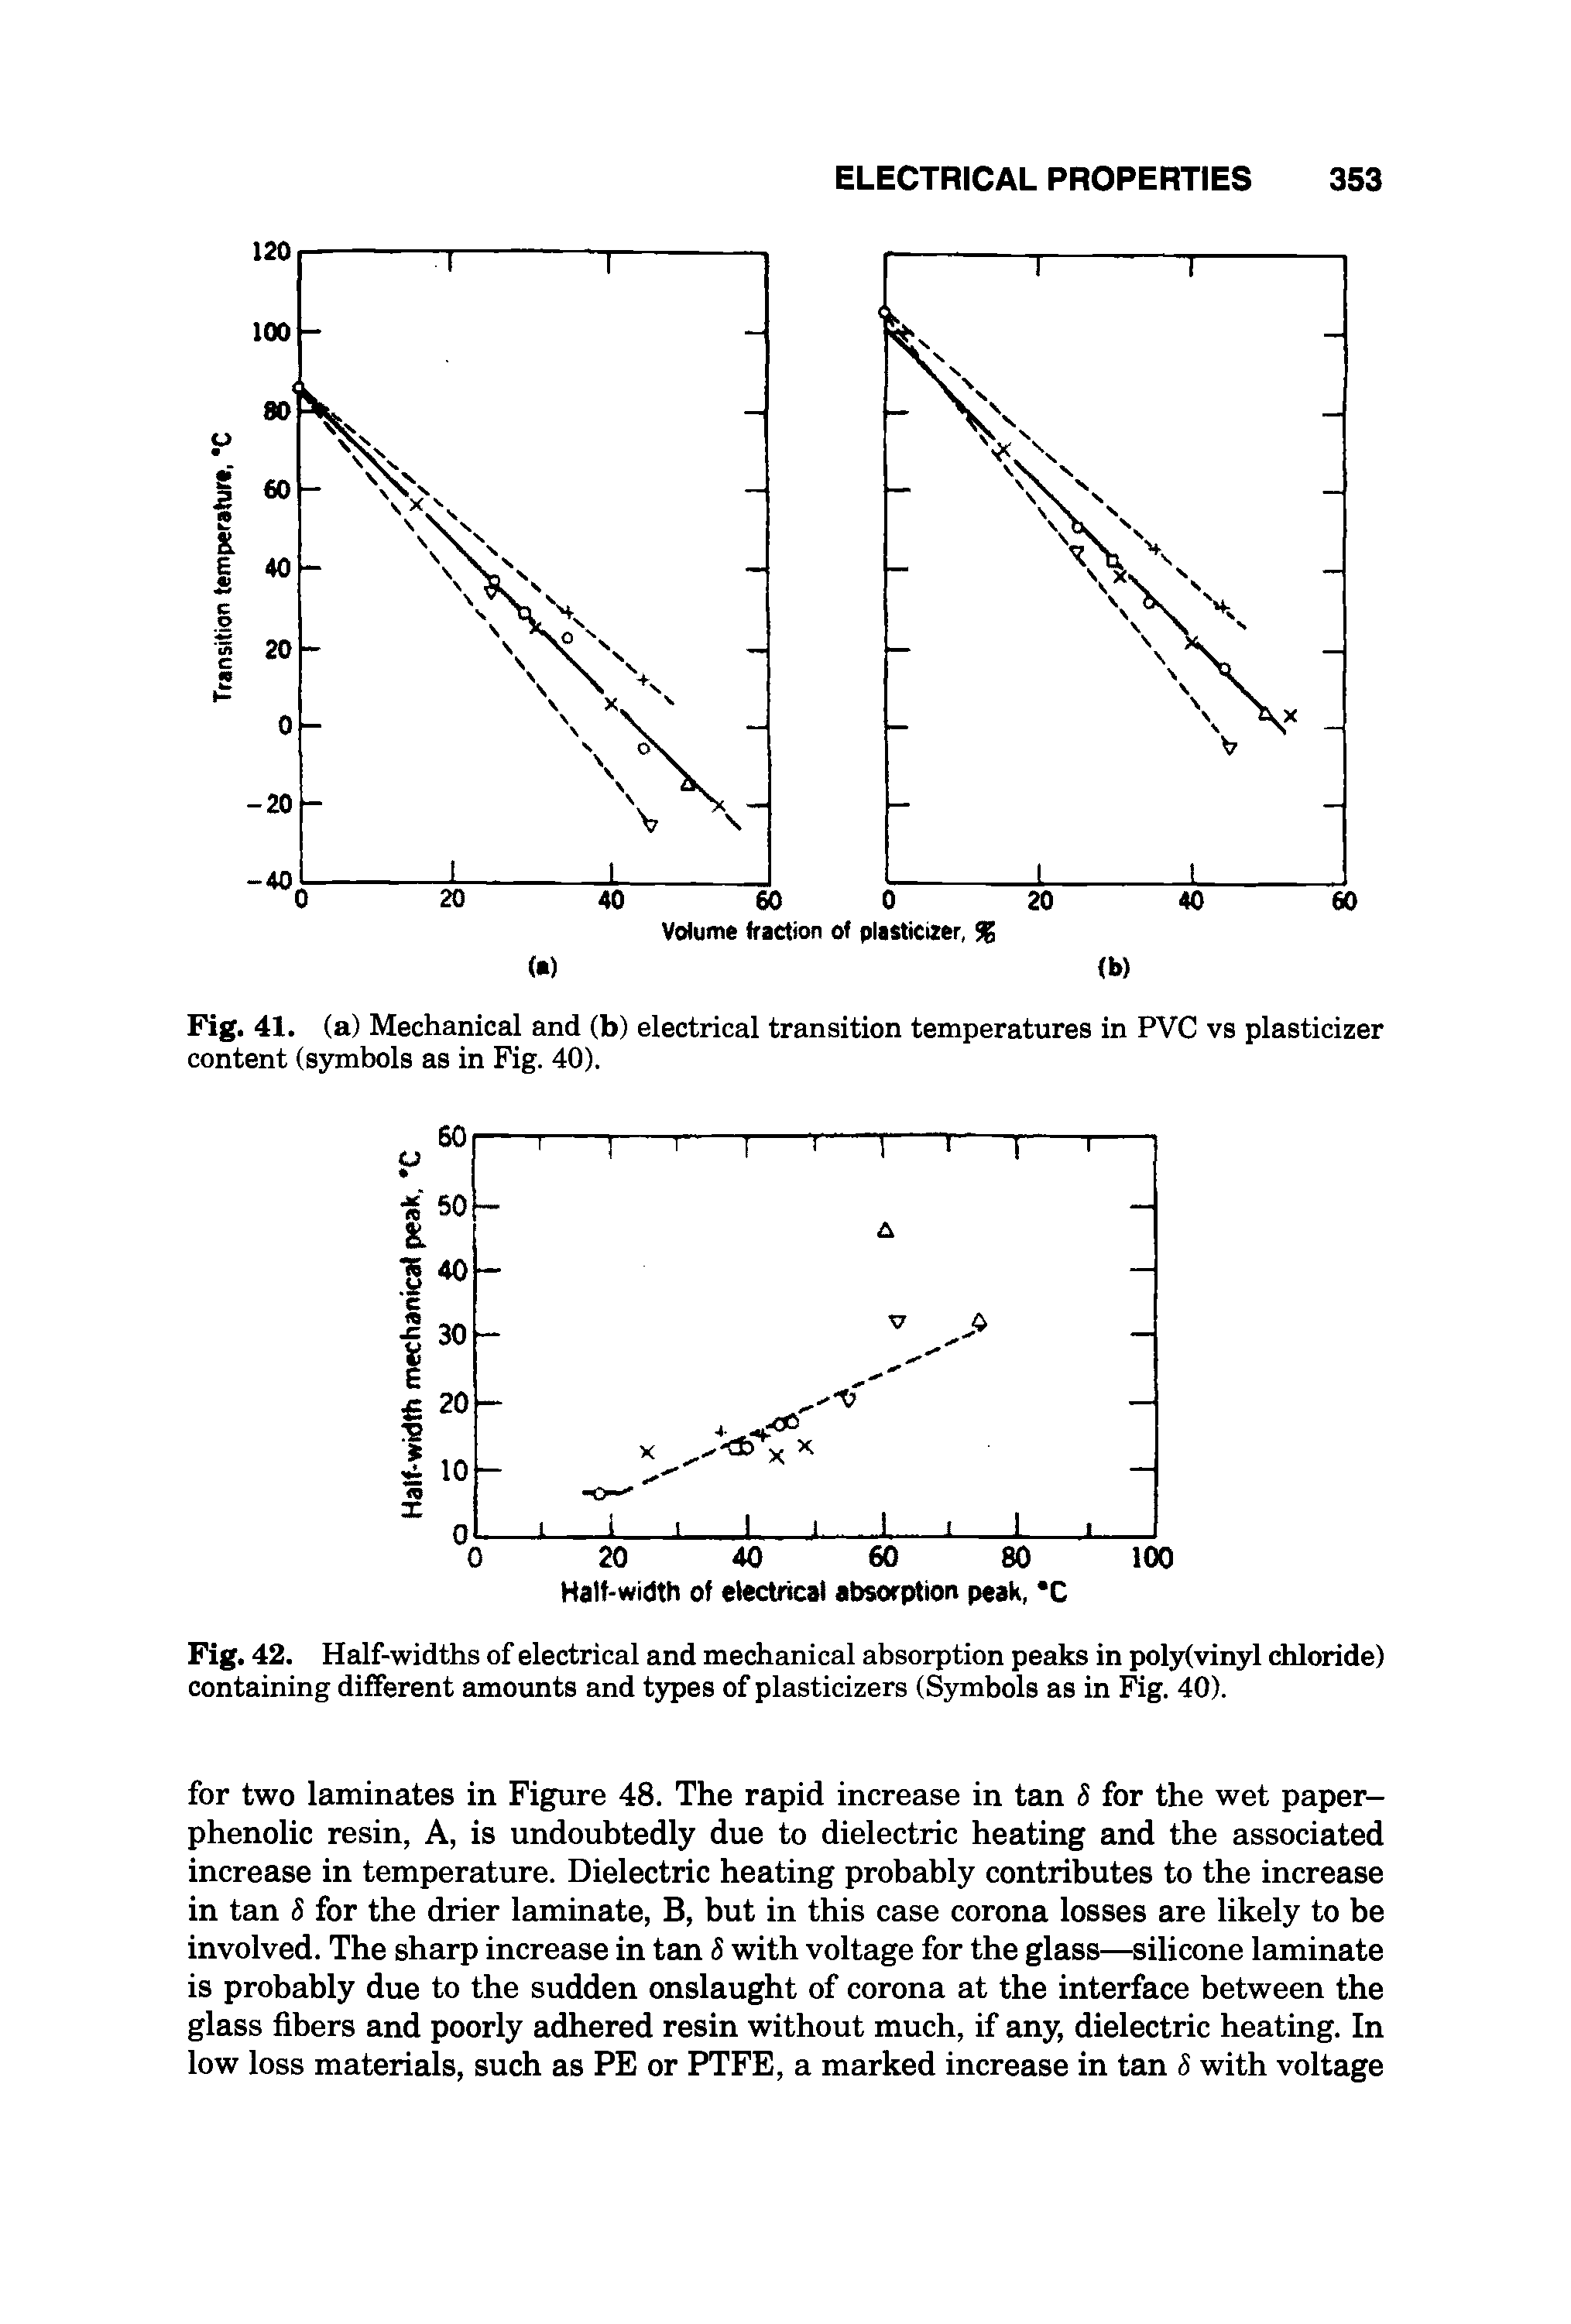 Fig. 42. Half-widths of electrical and mechanical absorption peaks in poly(vinyl chloride) containing different amounts and types of plasticizers (Symbols as in Fig. 40).